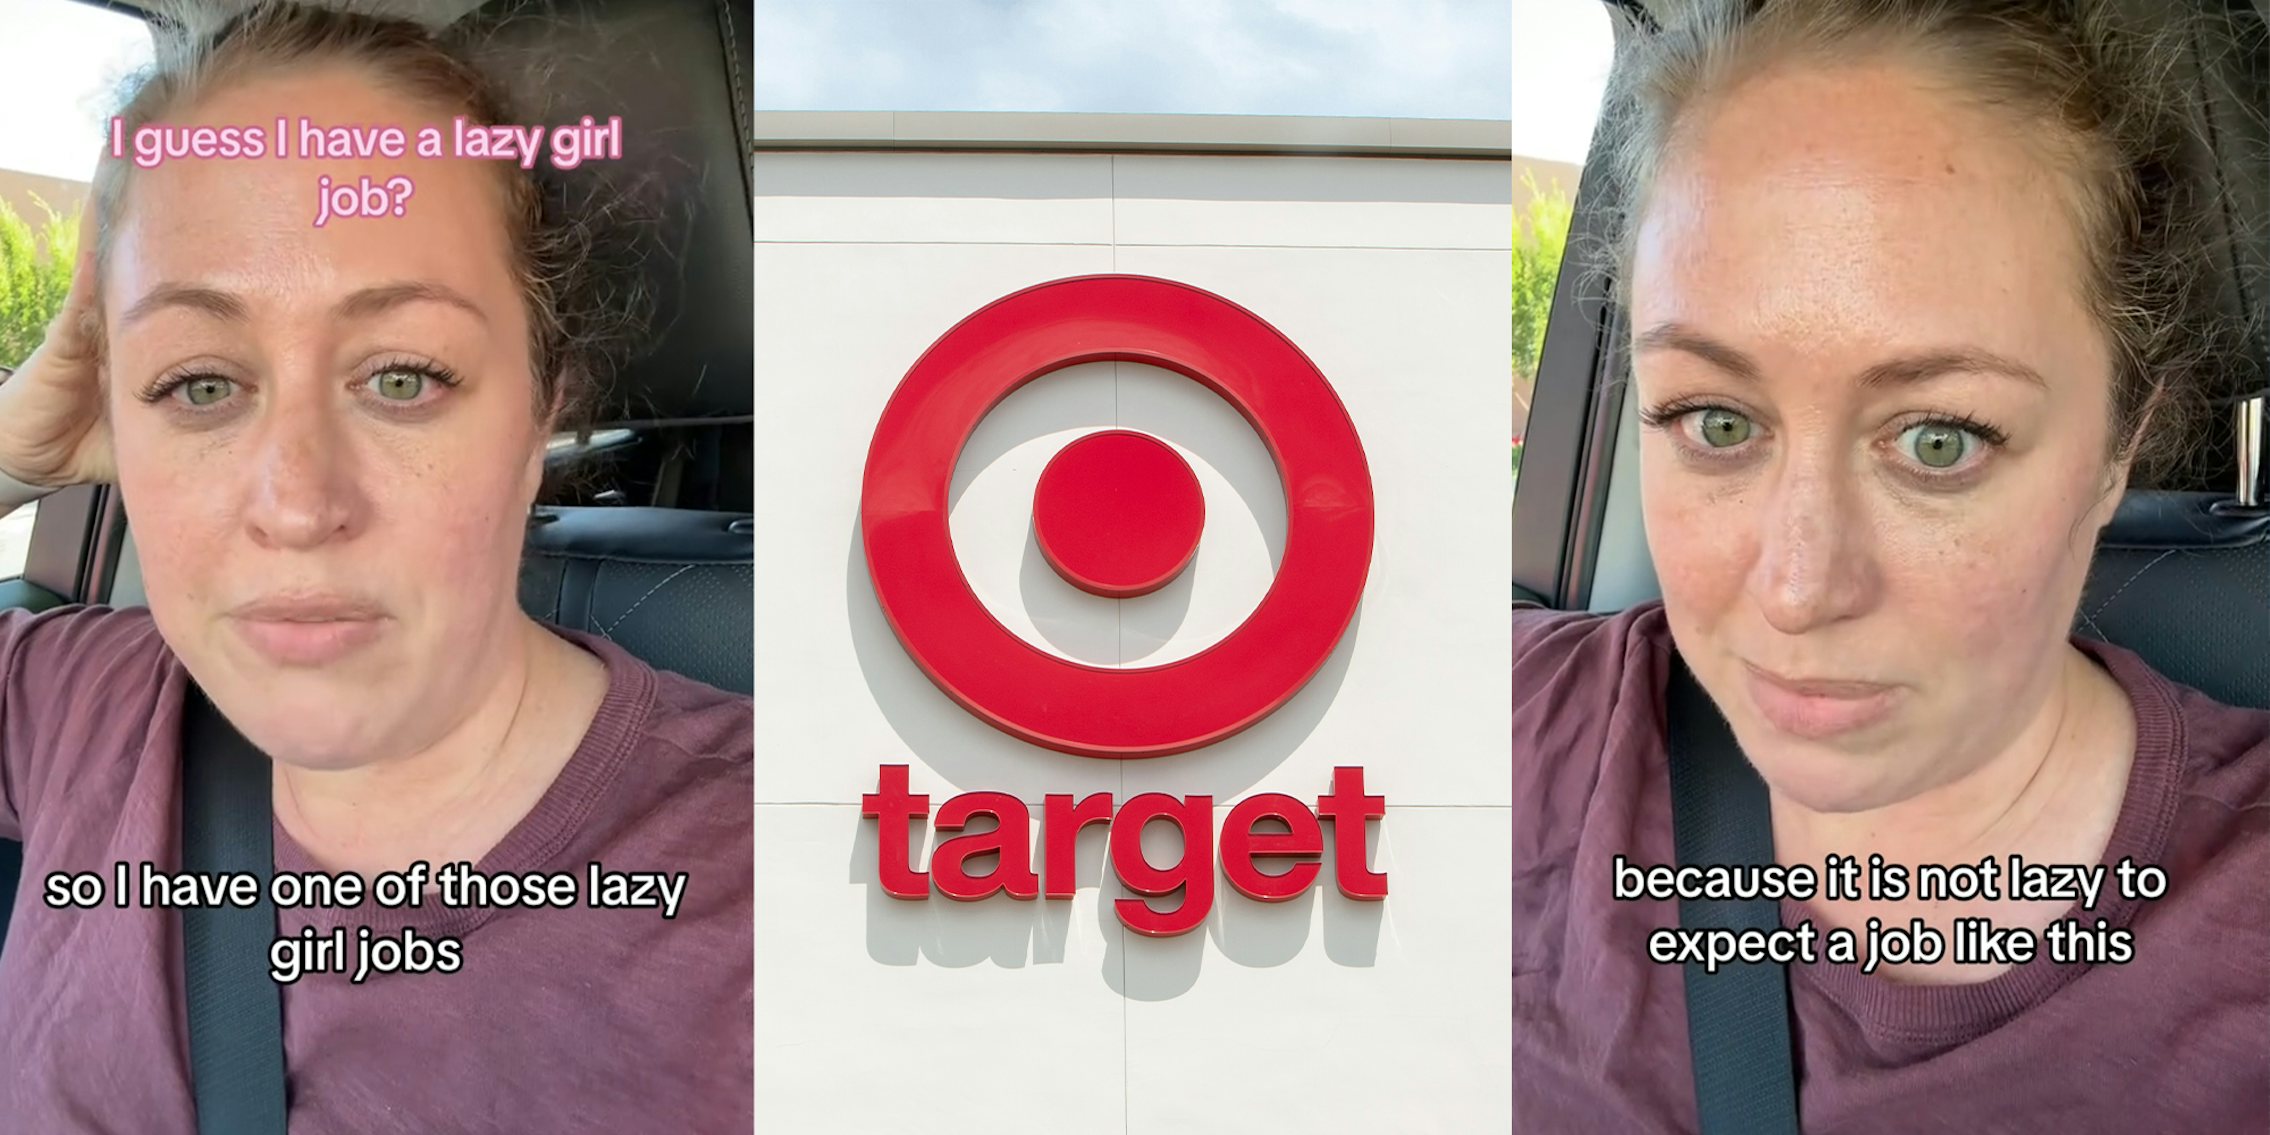 Woman with 'lazy girl job' goes to Target during the day. Her boss knows